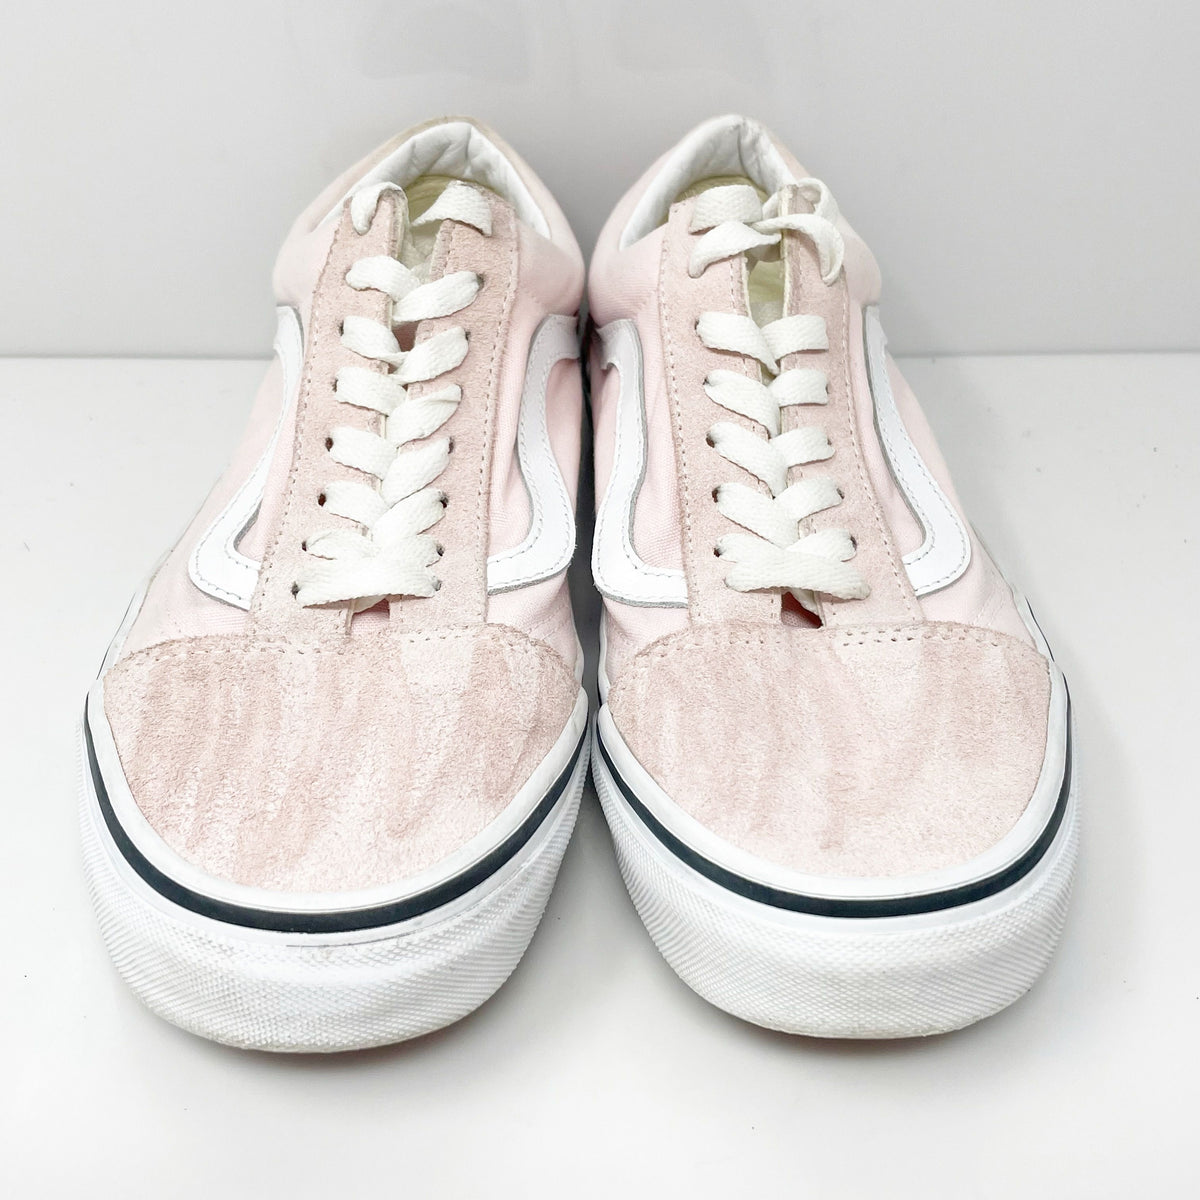 Vans Unisex Off The Wall 751505 Pink Casual Shoes Sneakers Size M 7.5 ...